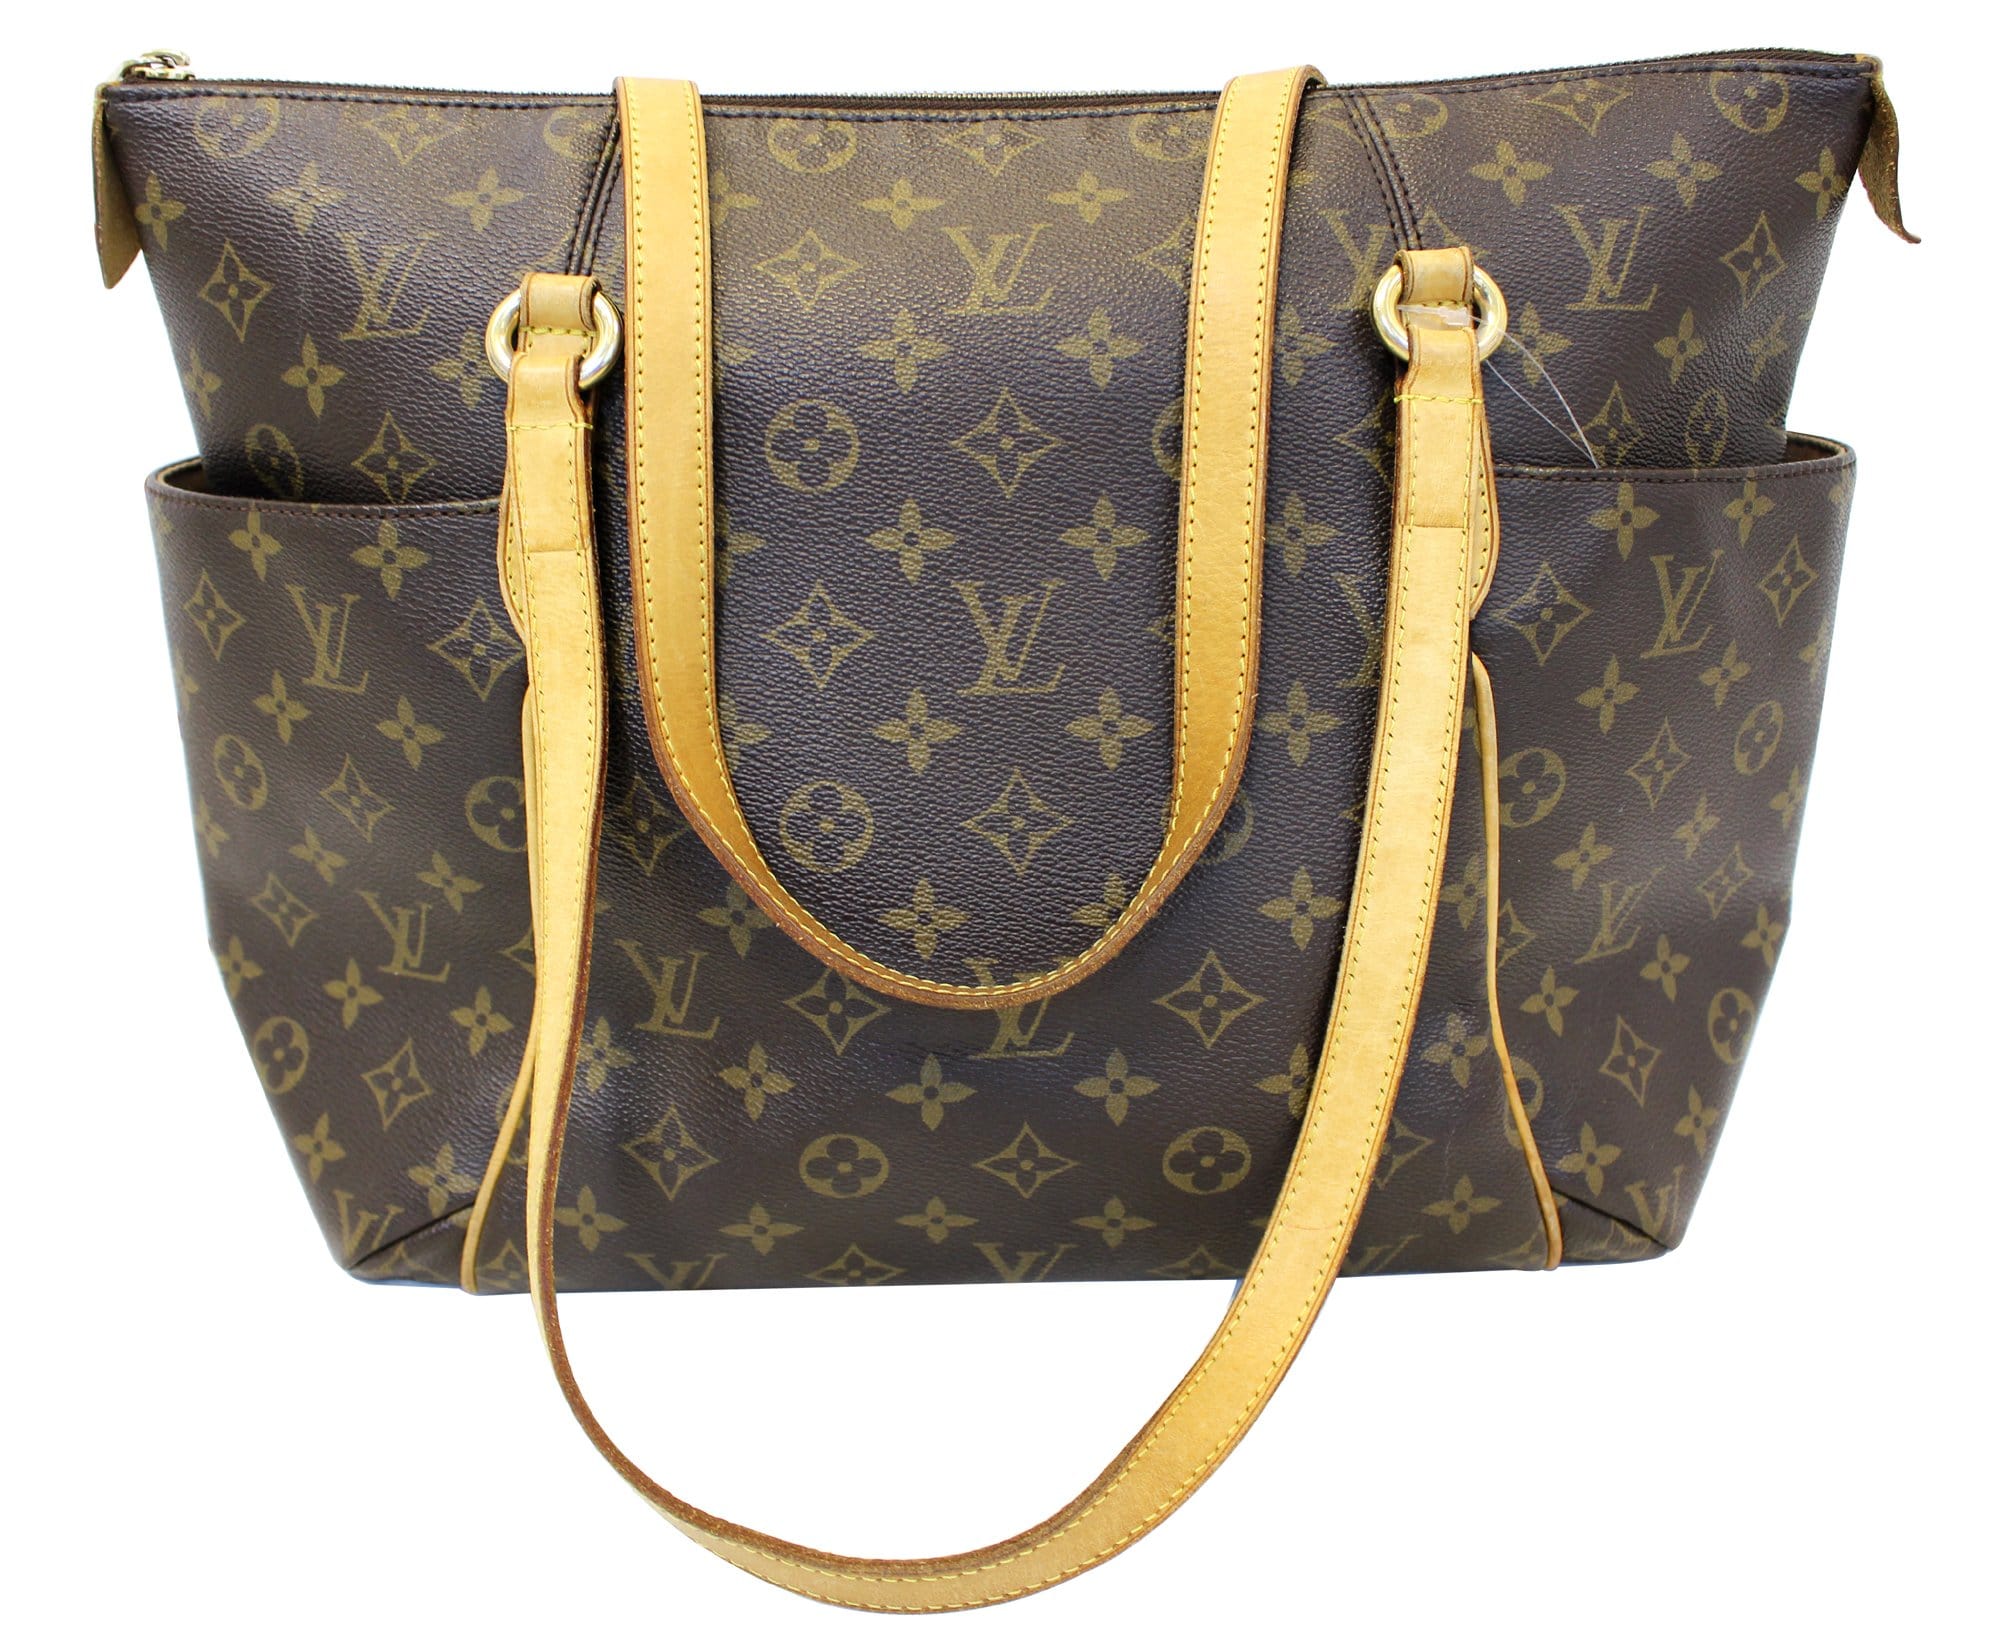 LOUIS VUITTON TOTALLY MM TOTE ICONIC PATTERN W/ DUST BAG & BOX